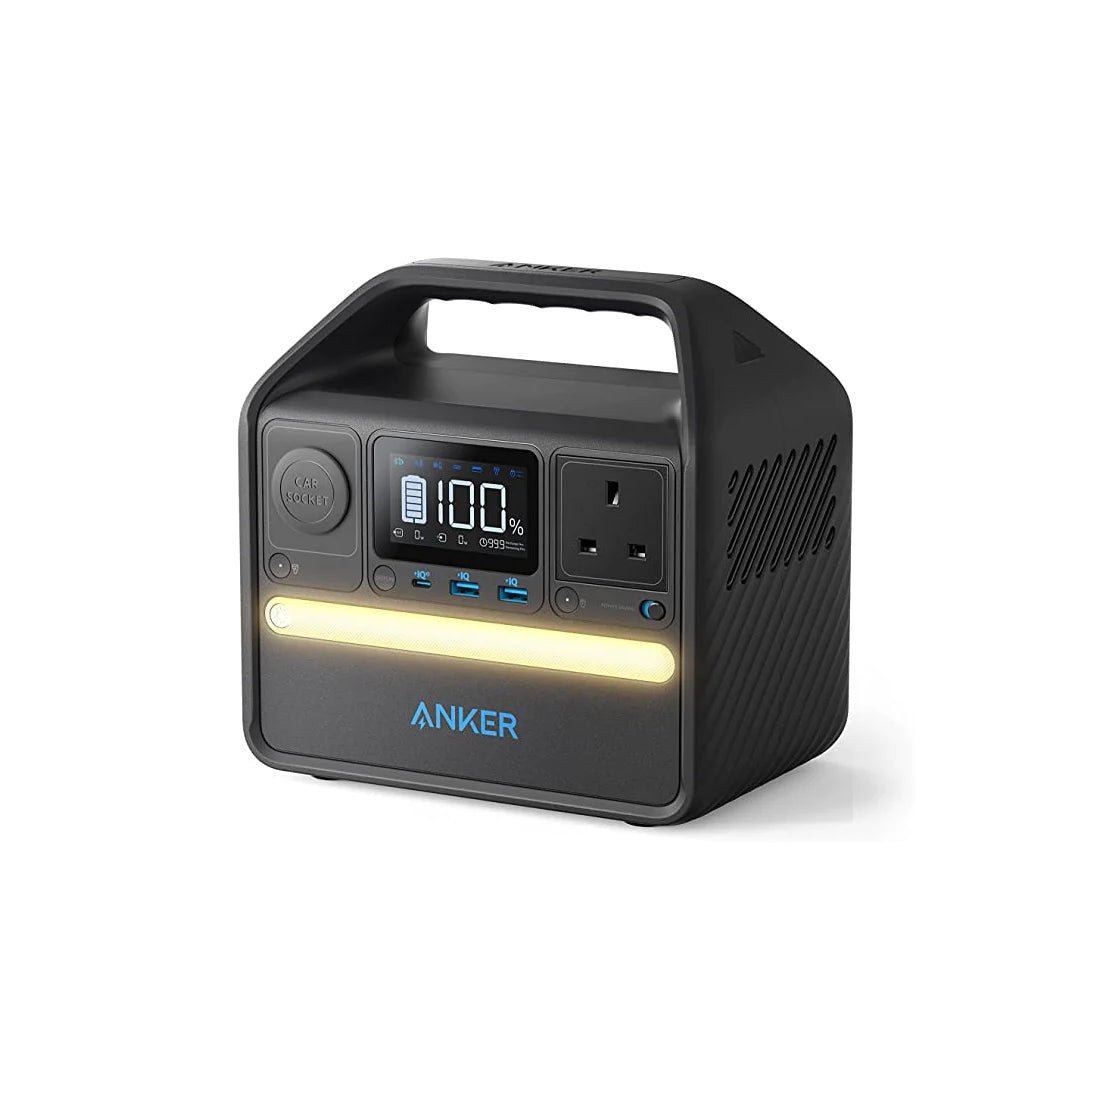 Anker 521 Portable 256Wh Power Station - Black - مزود طاقة - Store 974 | ستور ٩٧٤